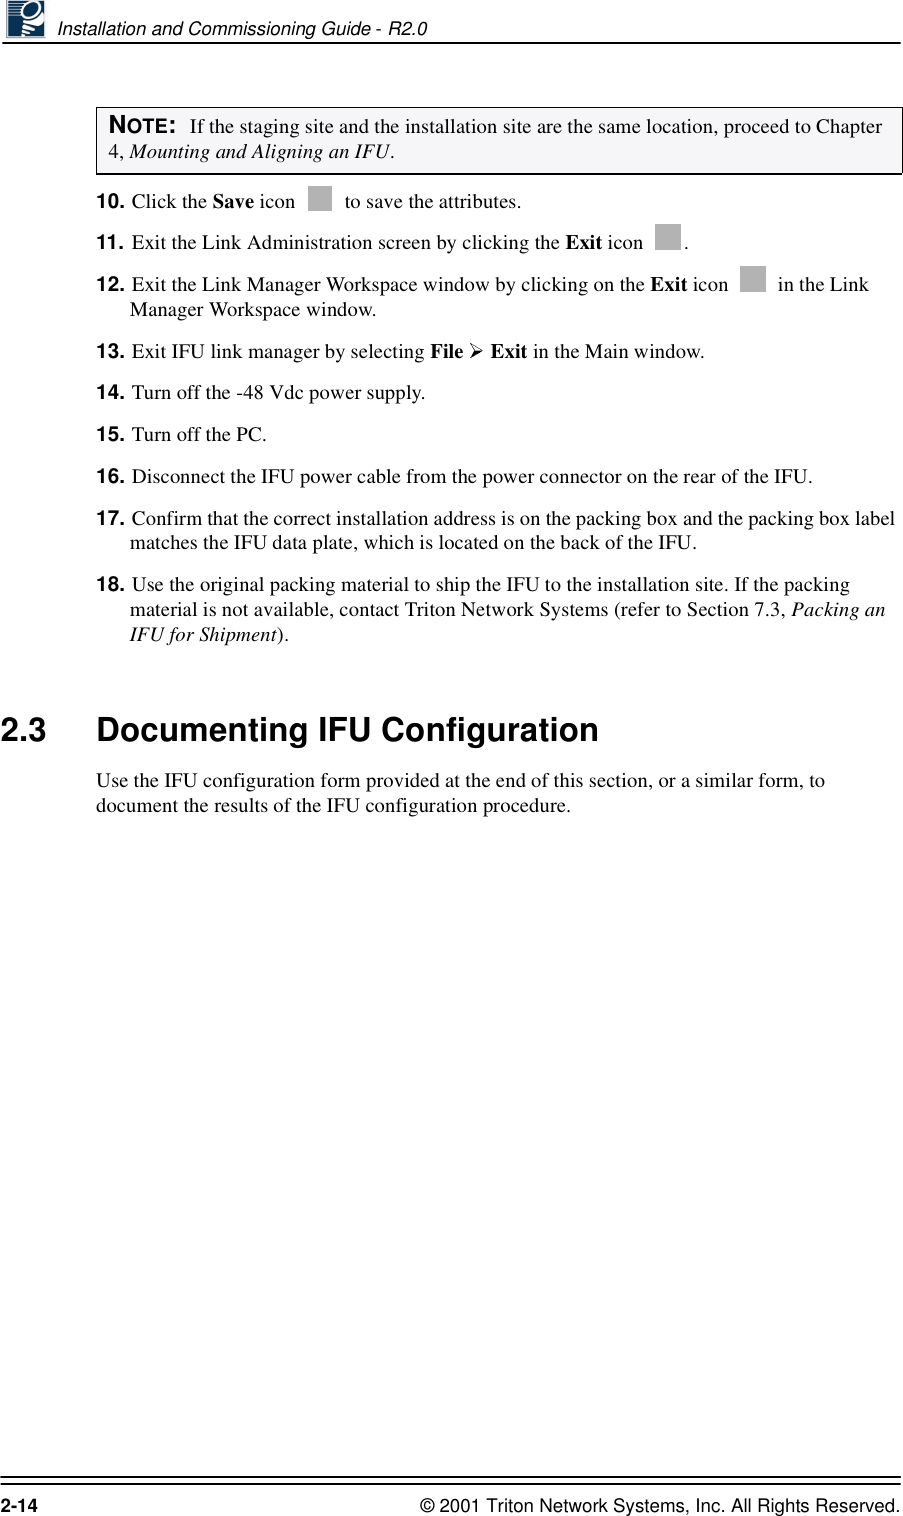  Installation and Commissioning Guide - R2.02-14 © 2001 Triton Network Systems, Inc. All Rights Reserved.10. Click the Save icon   to save the attributes.11. Exit the Link Administration screen by clicking the Exit icon  .12. Exit the Link Manager Workspace window by clicking on the Exit icon   in the Link Manager Workspace window. 13. Exit IFU link manager by selecting File   Exit in the Main window. 14. Turn off the -48 Vdc power supply.15. Turn off the PC.16. Disconnect the IFU power cable from the power connector on the rear of the IFU.17. Confirm that the correct installation address is on the packing box and the packing box label matches the IFU data plate, which is located on the back of the IFU.18. Use the original packing material to ship the IFU to the installation site. If the packing material is not available, contact Triton Network Systems (refer to Section 7.3, Packing an IFU for Shipment).2.3 Documenting IFU ConfigurationUse the IFU configuration form provided at the end of this section, or a similar form, to document the results of the IFU configuration procedure.NOTE:  If the staging site and the installation site are the same location, proceed to Chapter 4, Mounting and Aligning an IFU.